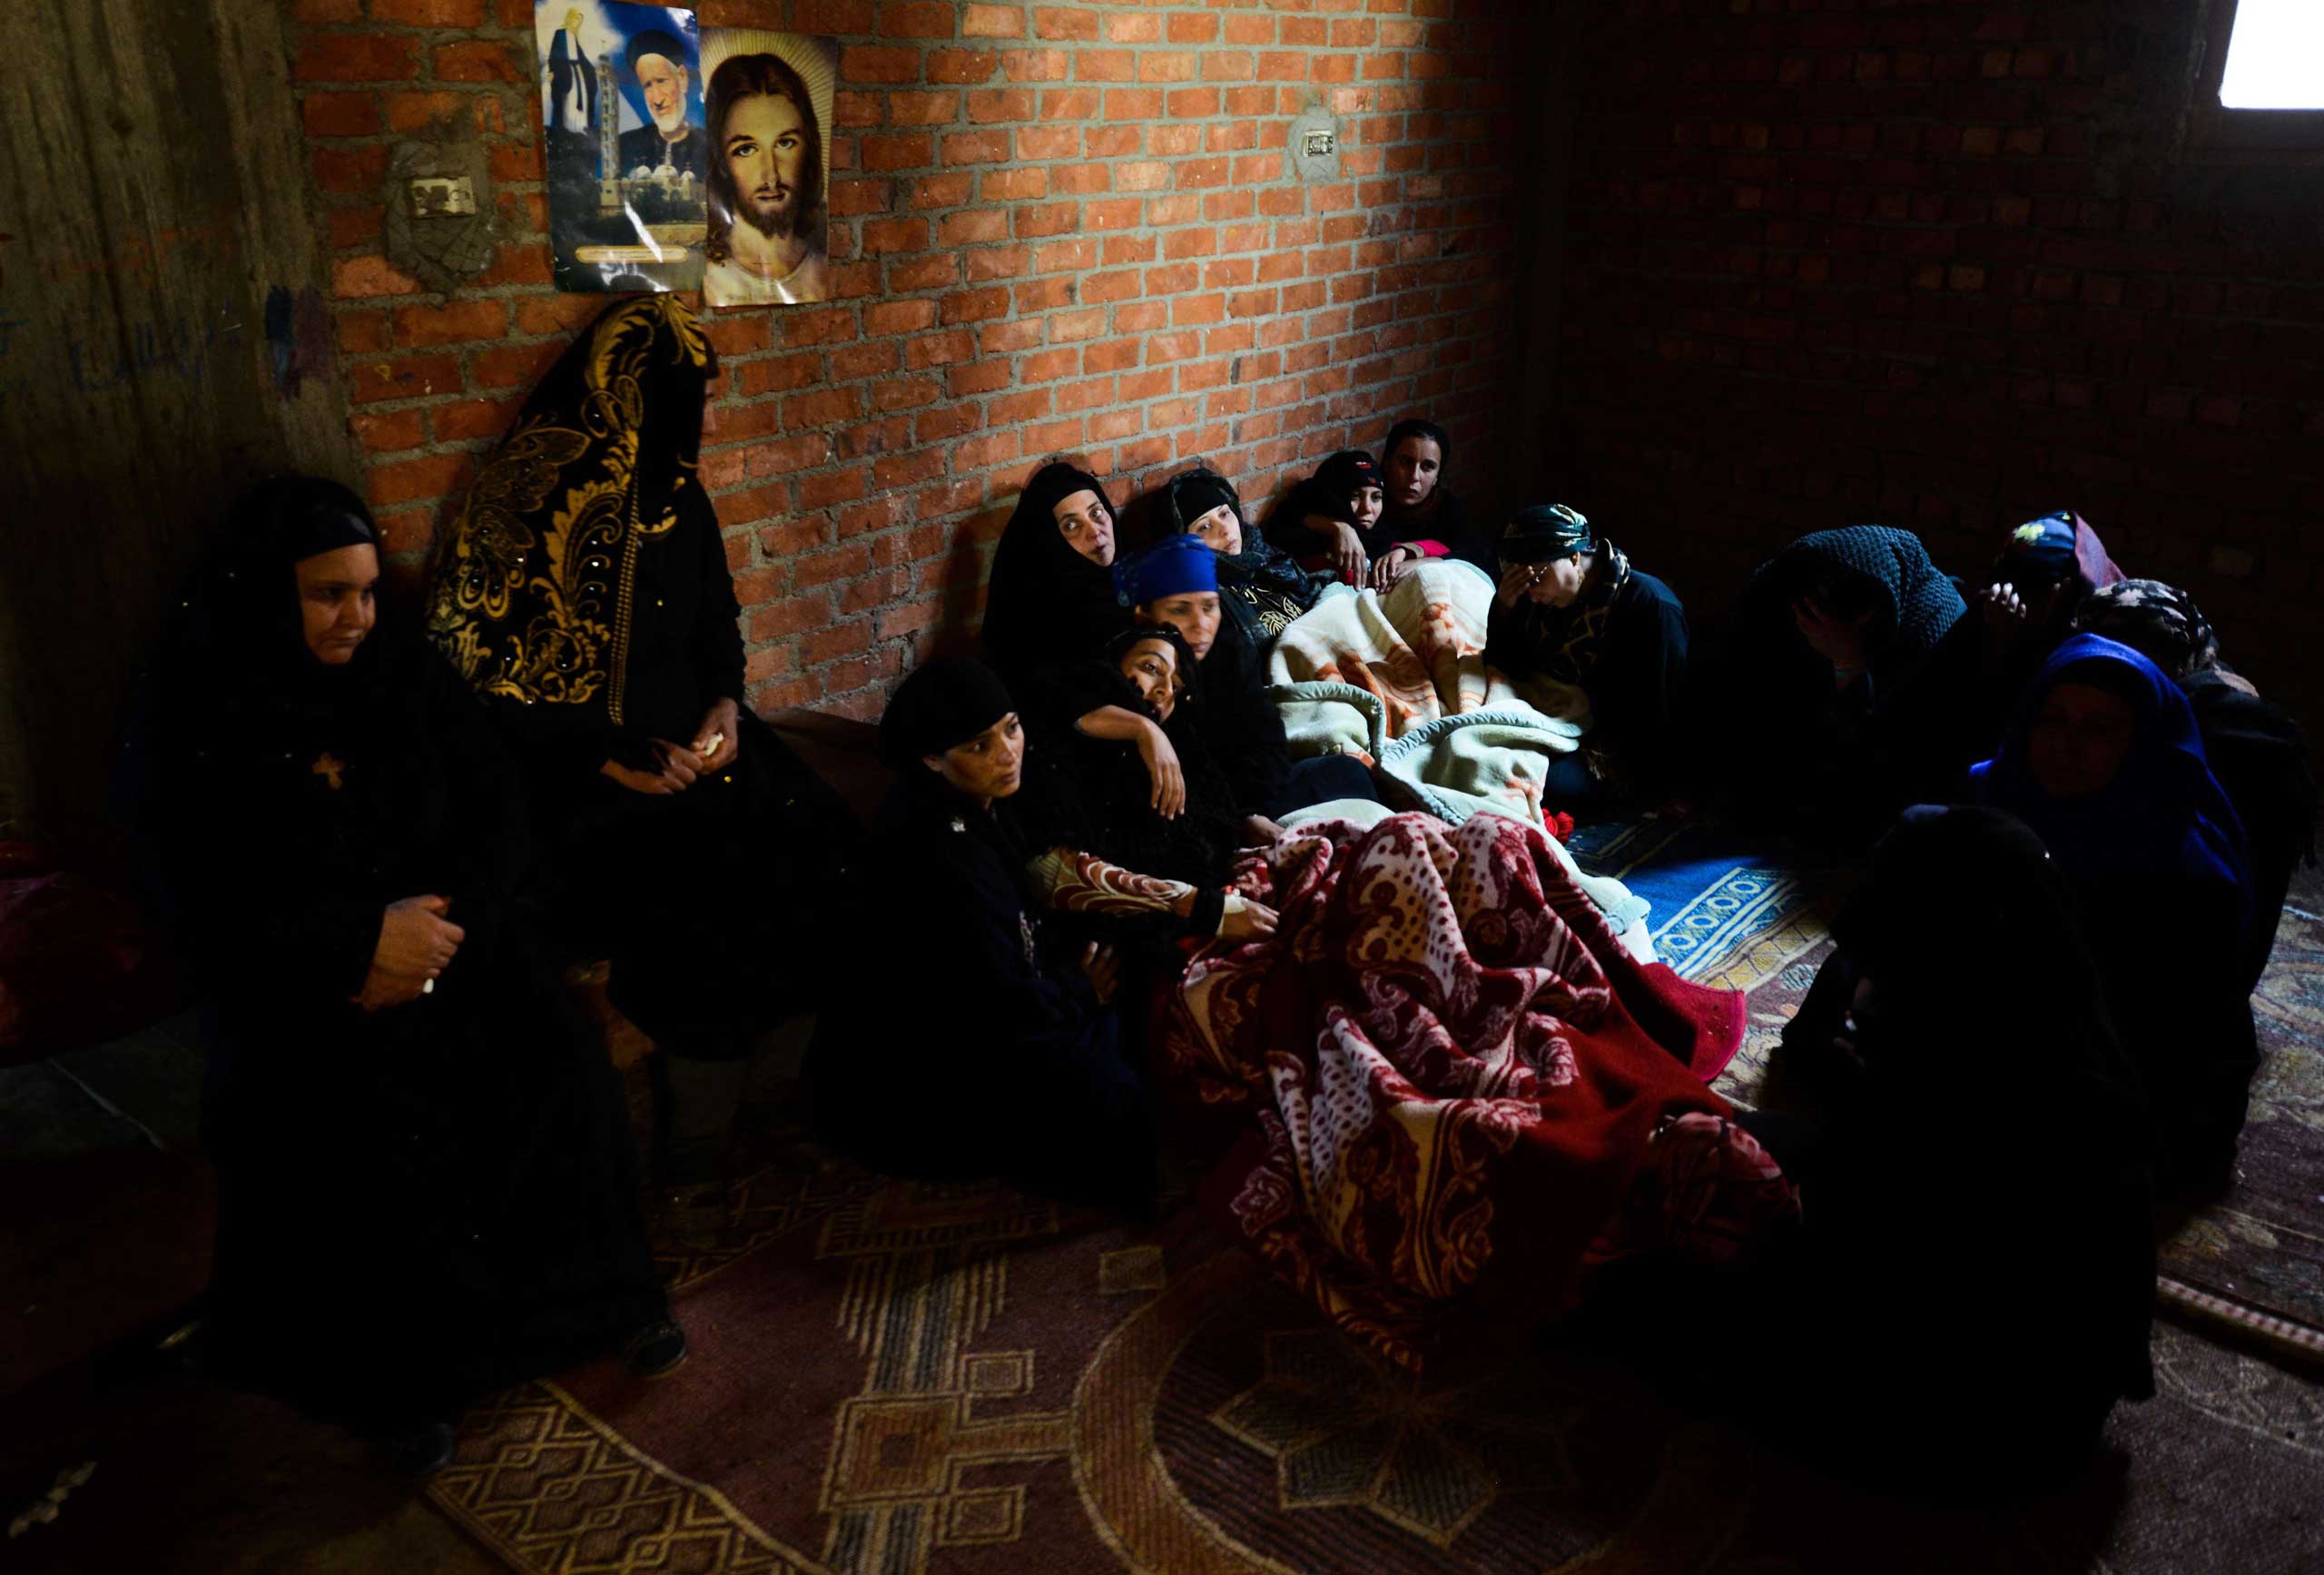 Relatives of Egyptian Coptic Christians purportedly murdered by ISIS militants in Libya sit inside a house after hearing the news on Feb. 16, 2015 in the village of Al-Our in Egypt's southern province of Minya.